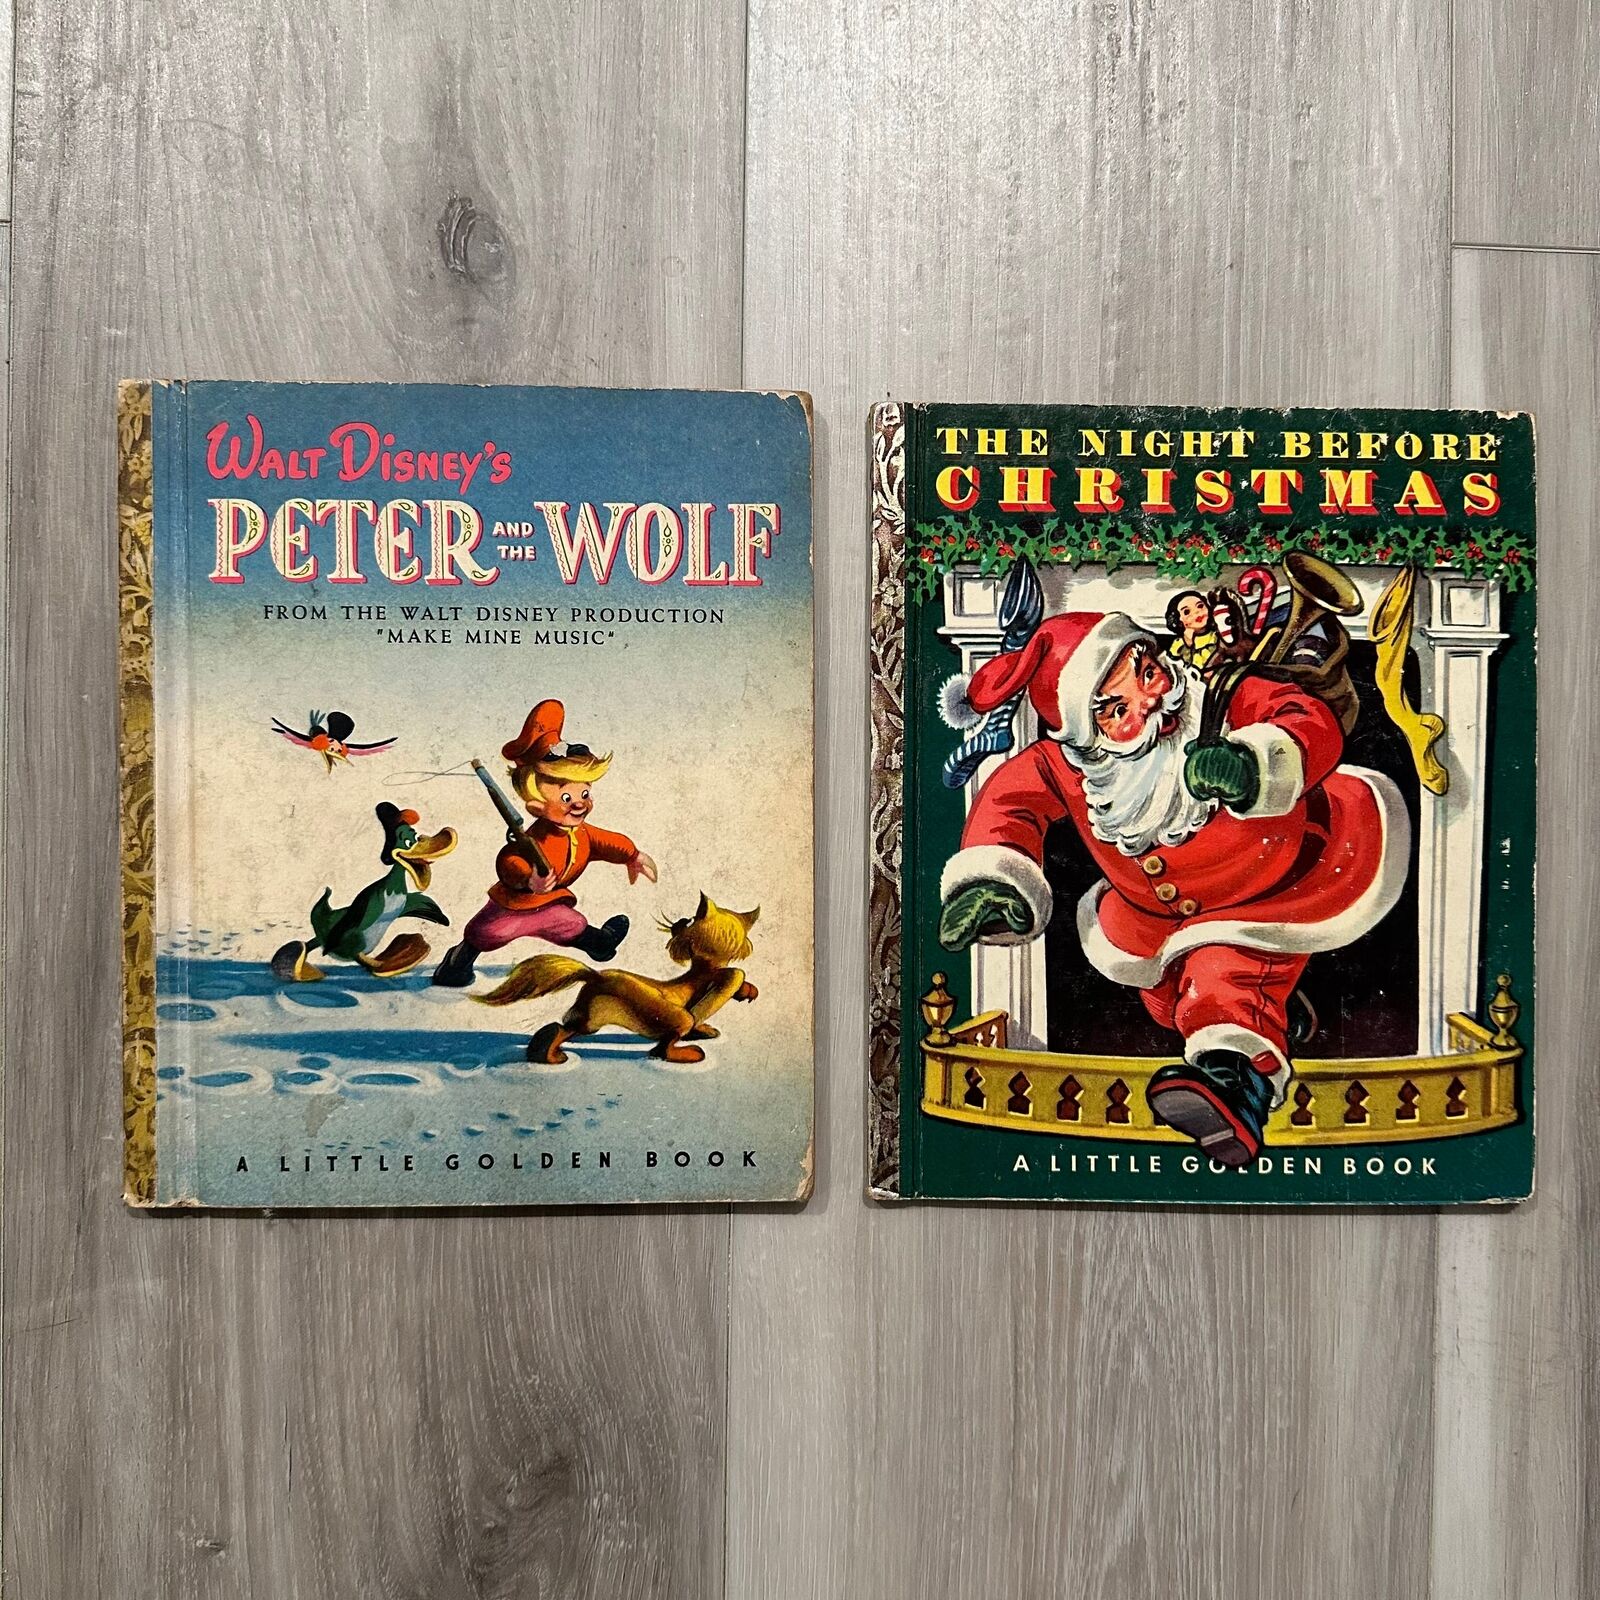 1940s Peter and the Wolf and The Night Before Christmas